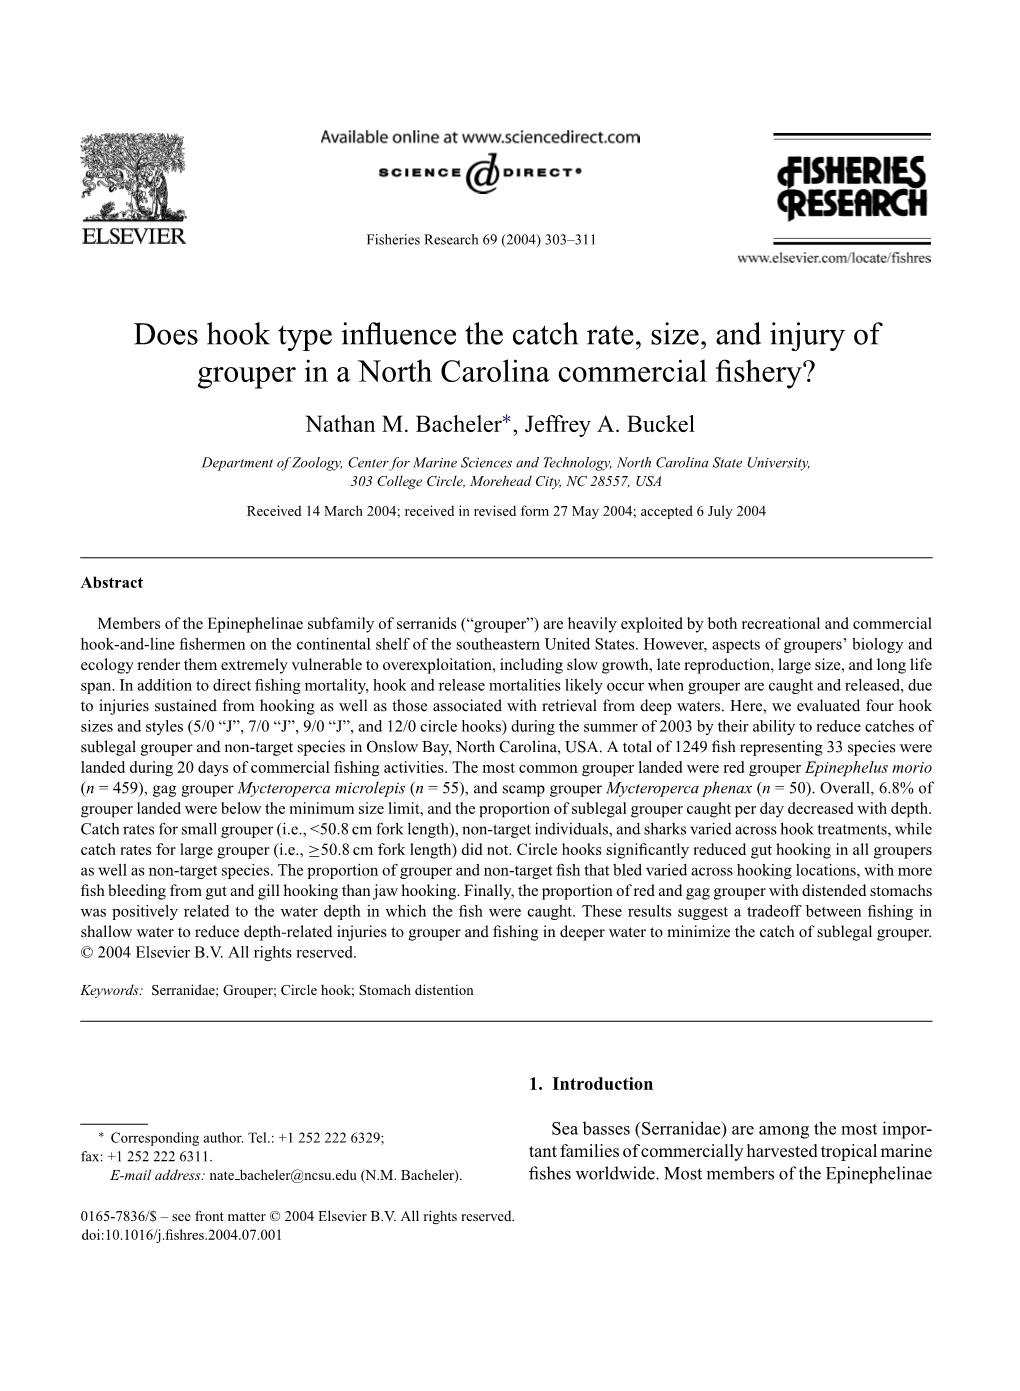 Does Hook Type Influence the Catch Rate, Size, and Injury of Grouper in a North Carolina Commercial Fishery?